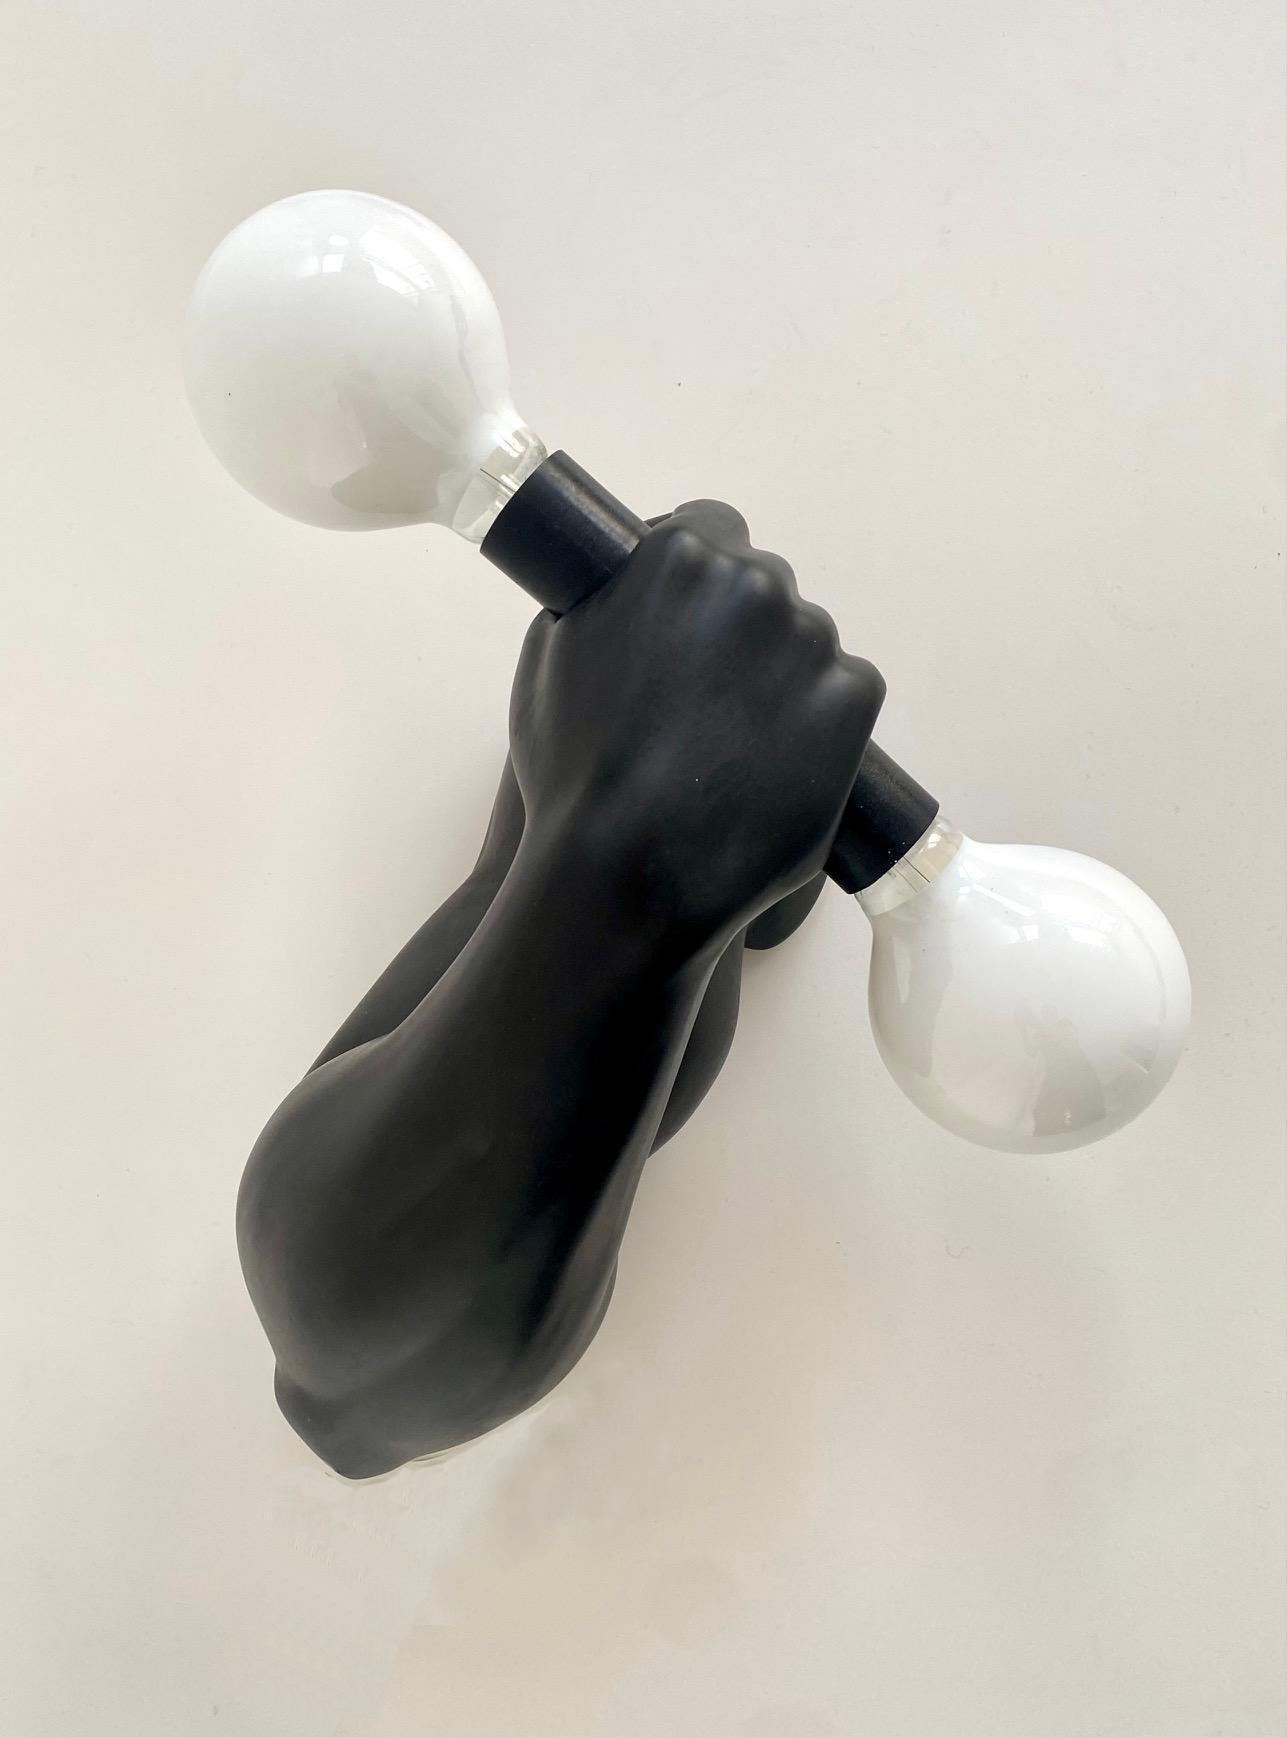 French Dumbbell Wall Light in Ceramic, J.C. Peiré, France, 1980s For Sale